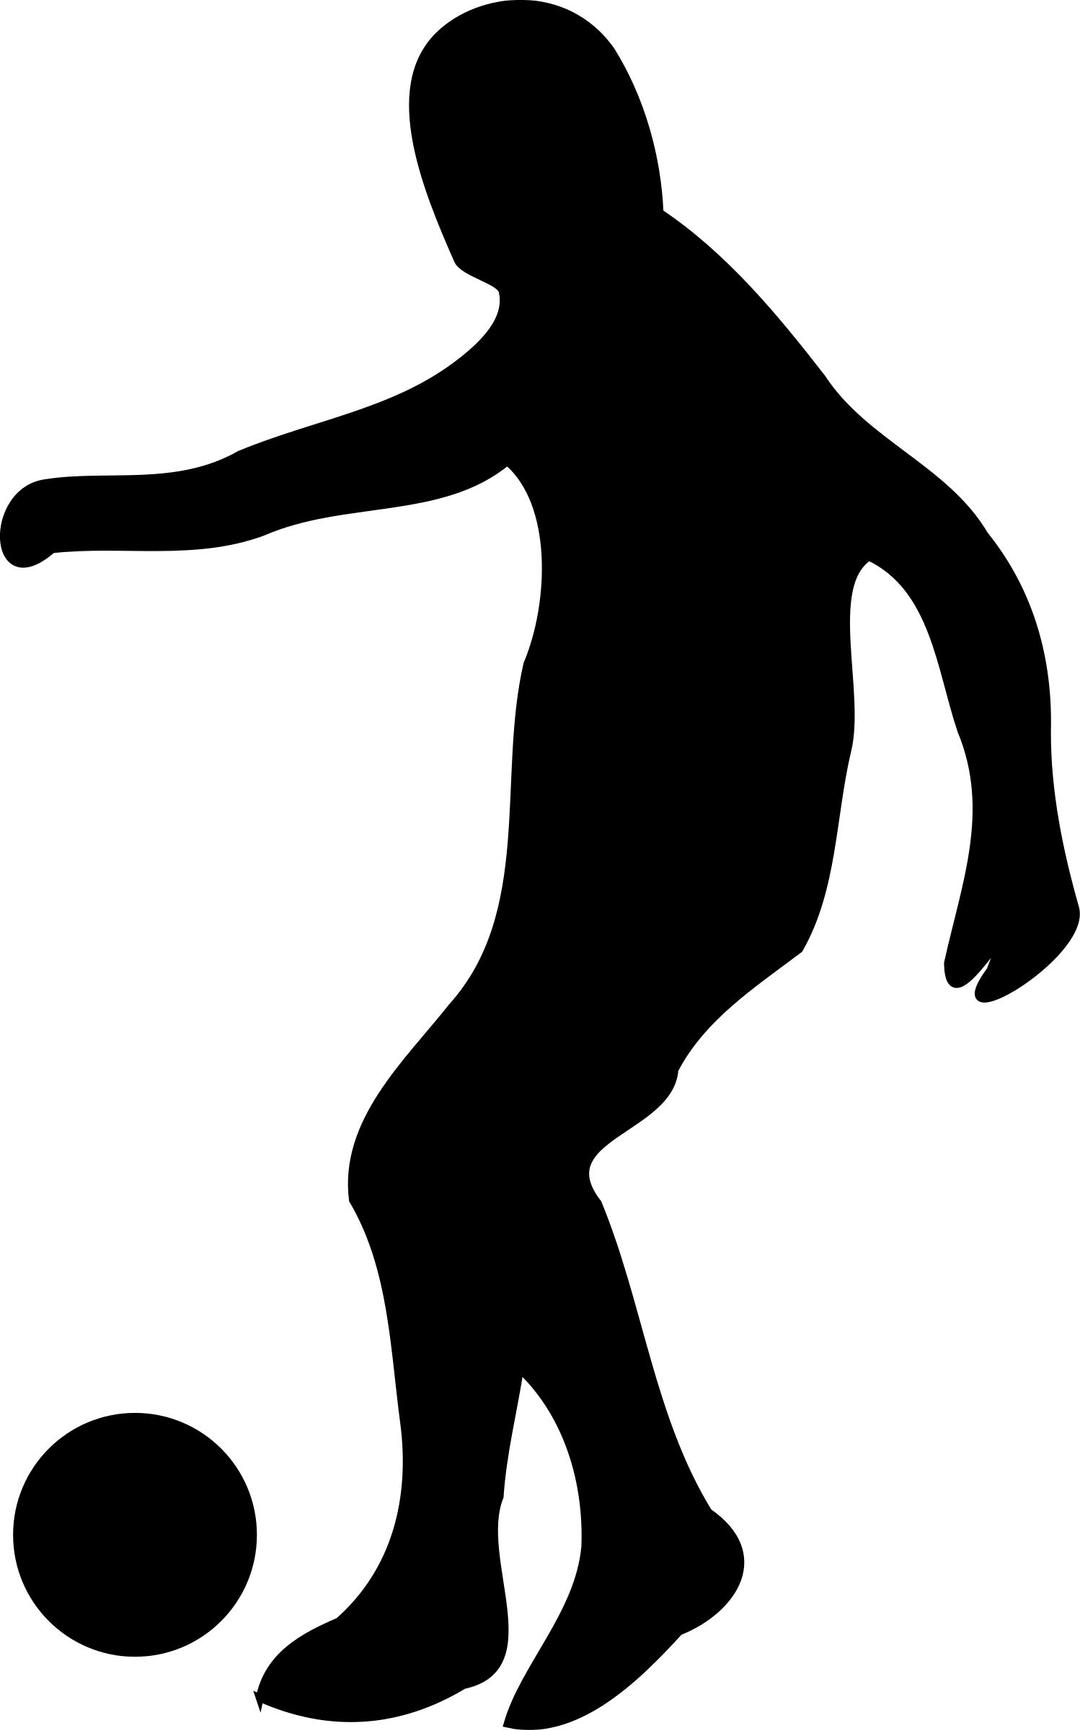 Soccer player silhouette png transparent